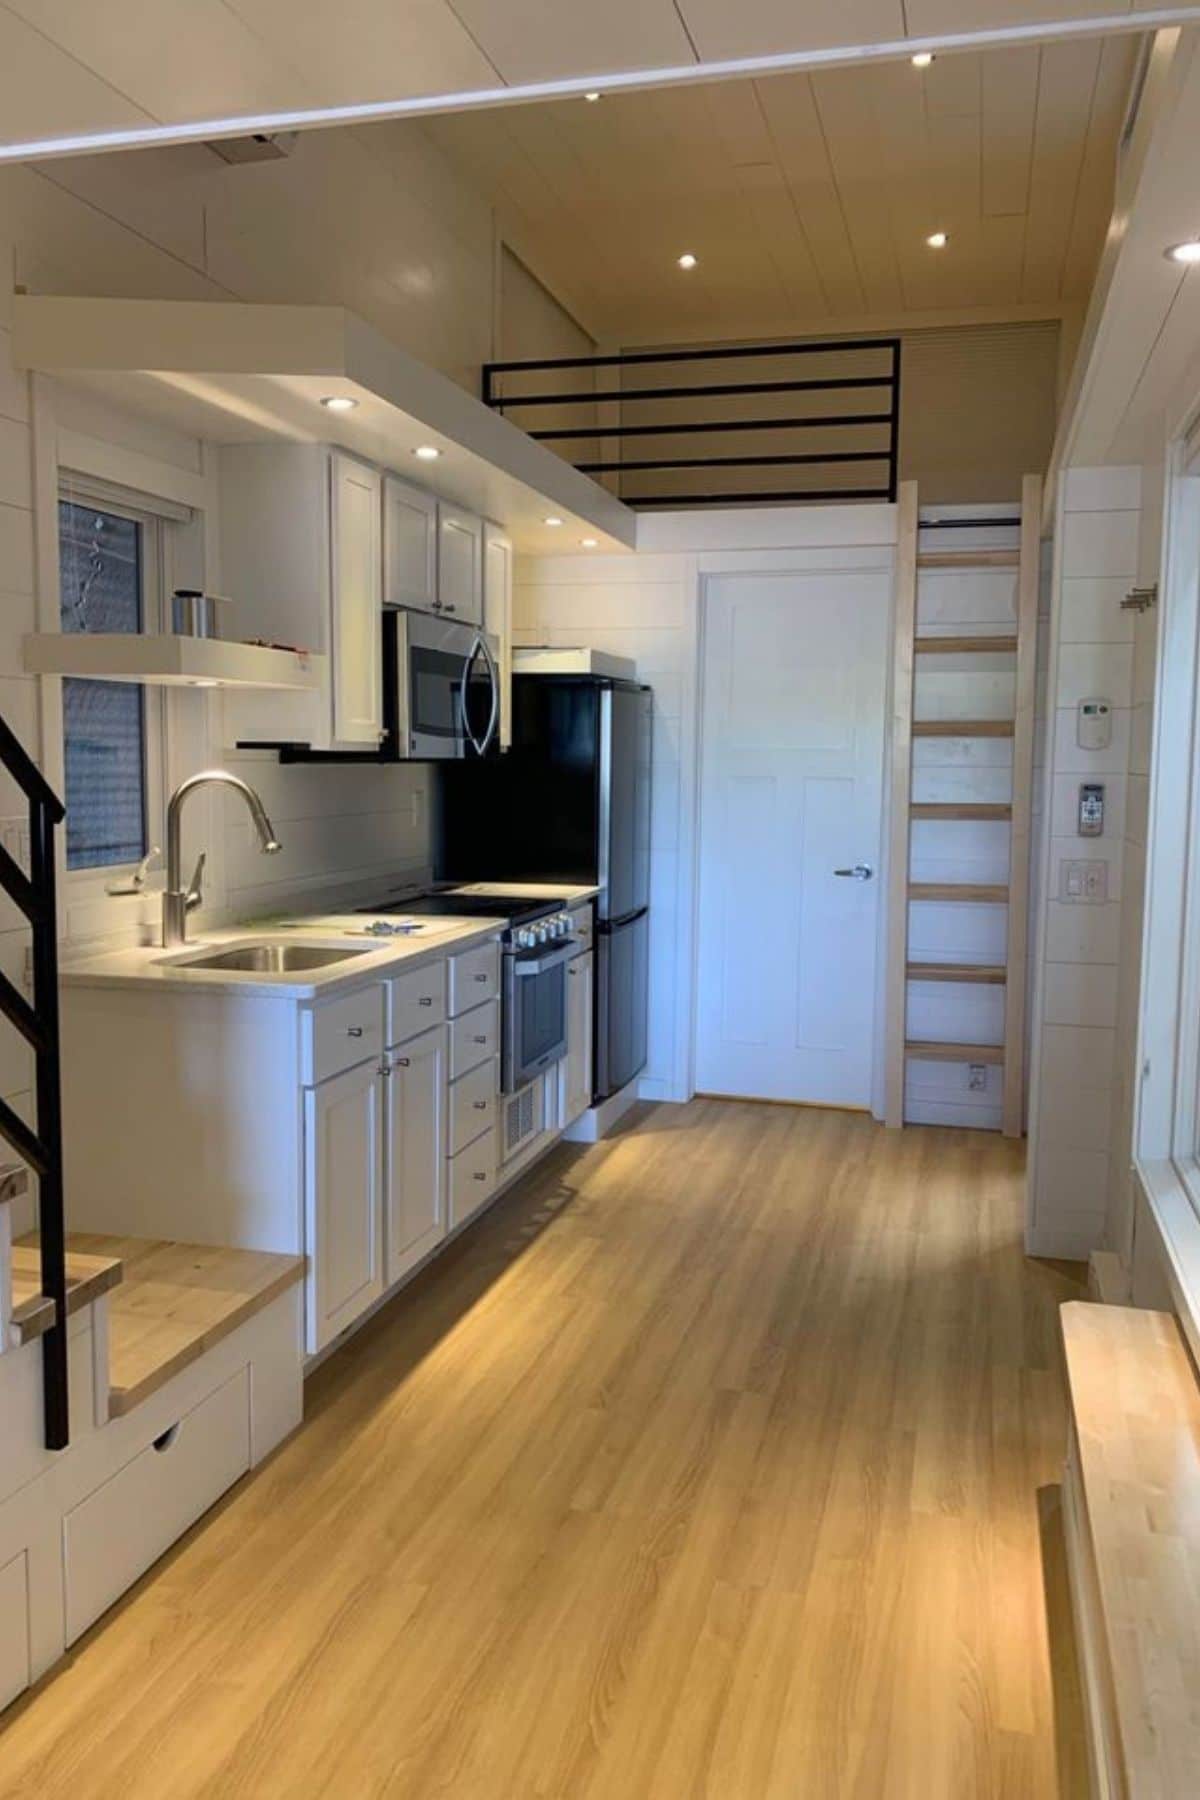 Tiny home kitchen and door to bathroom showing loft with wood ladder above bathroom